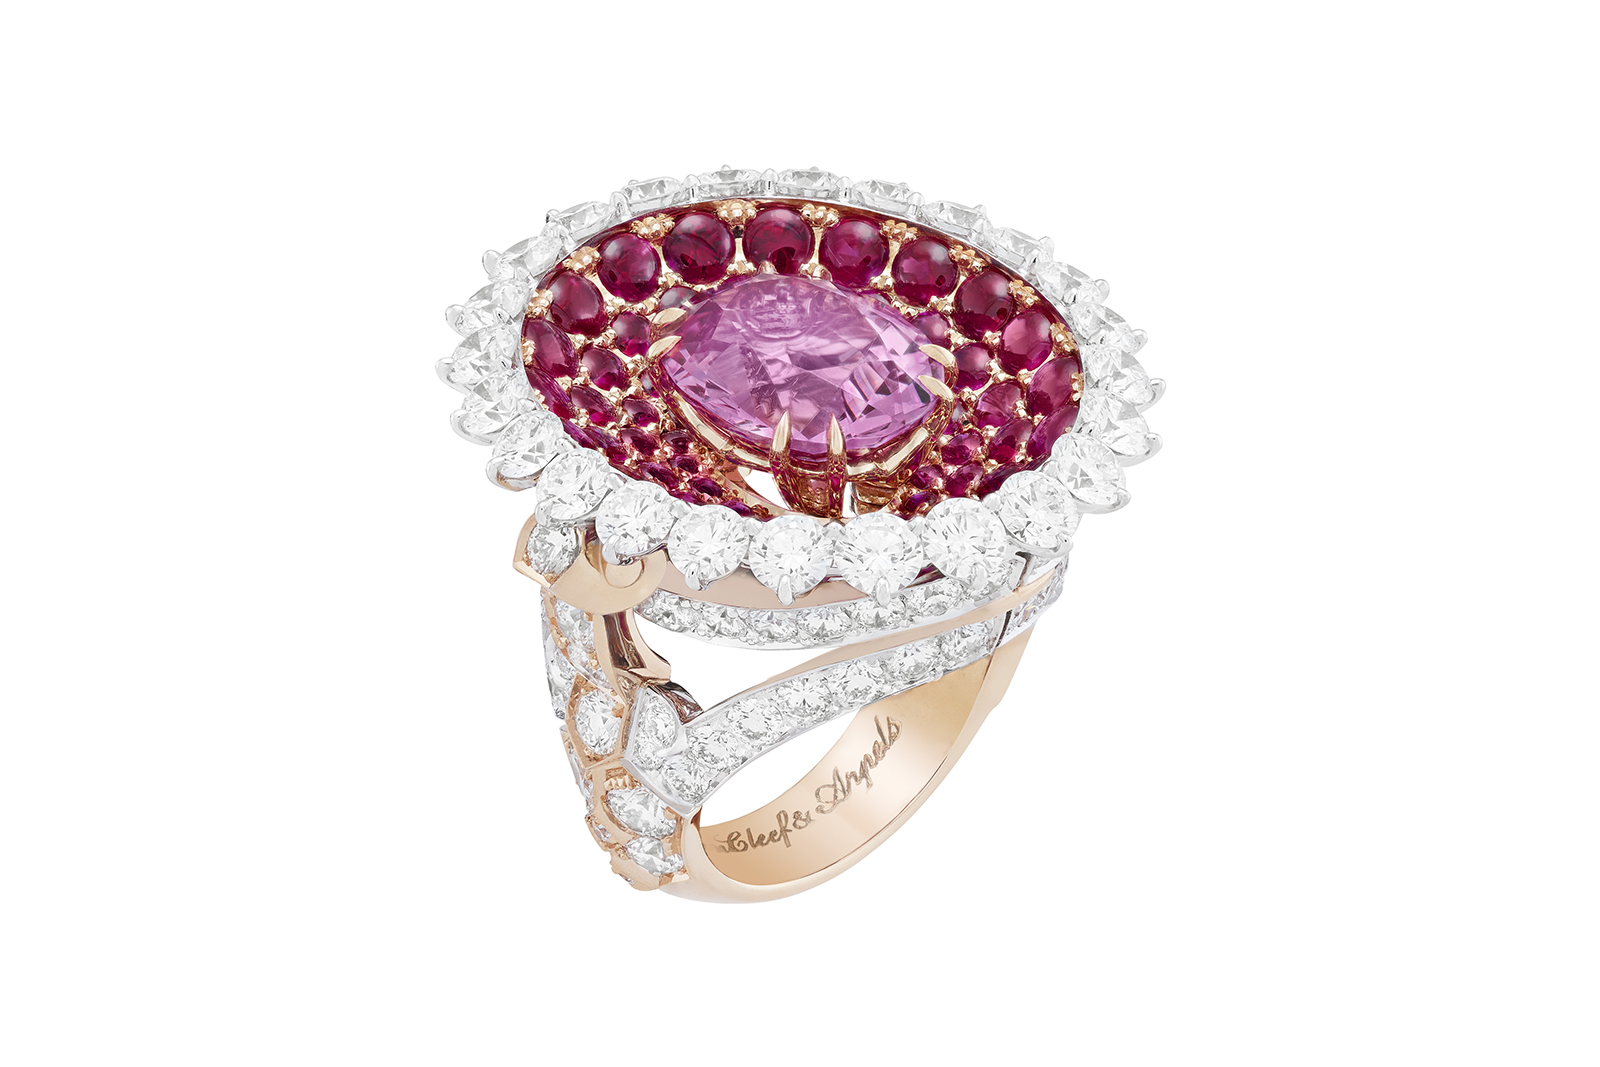 Van Cleef & Arpels: The launch of new fairytale collection 'Quatre ...